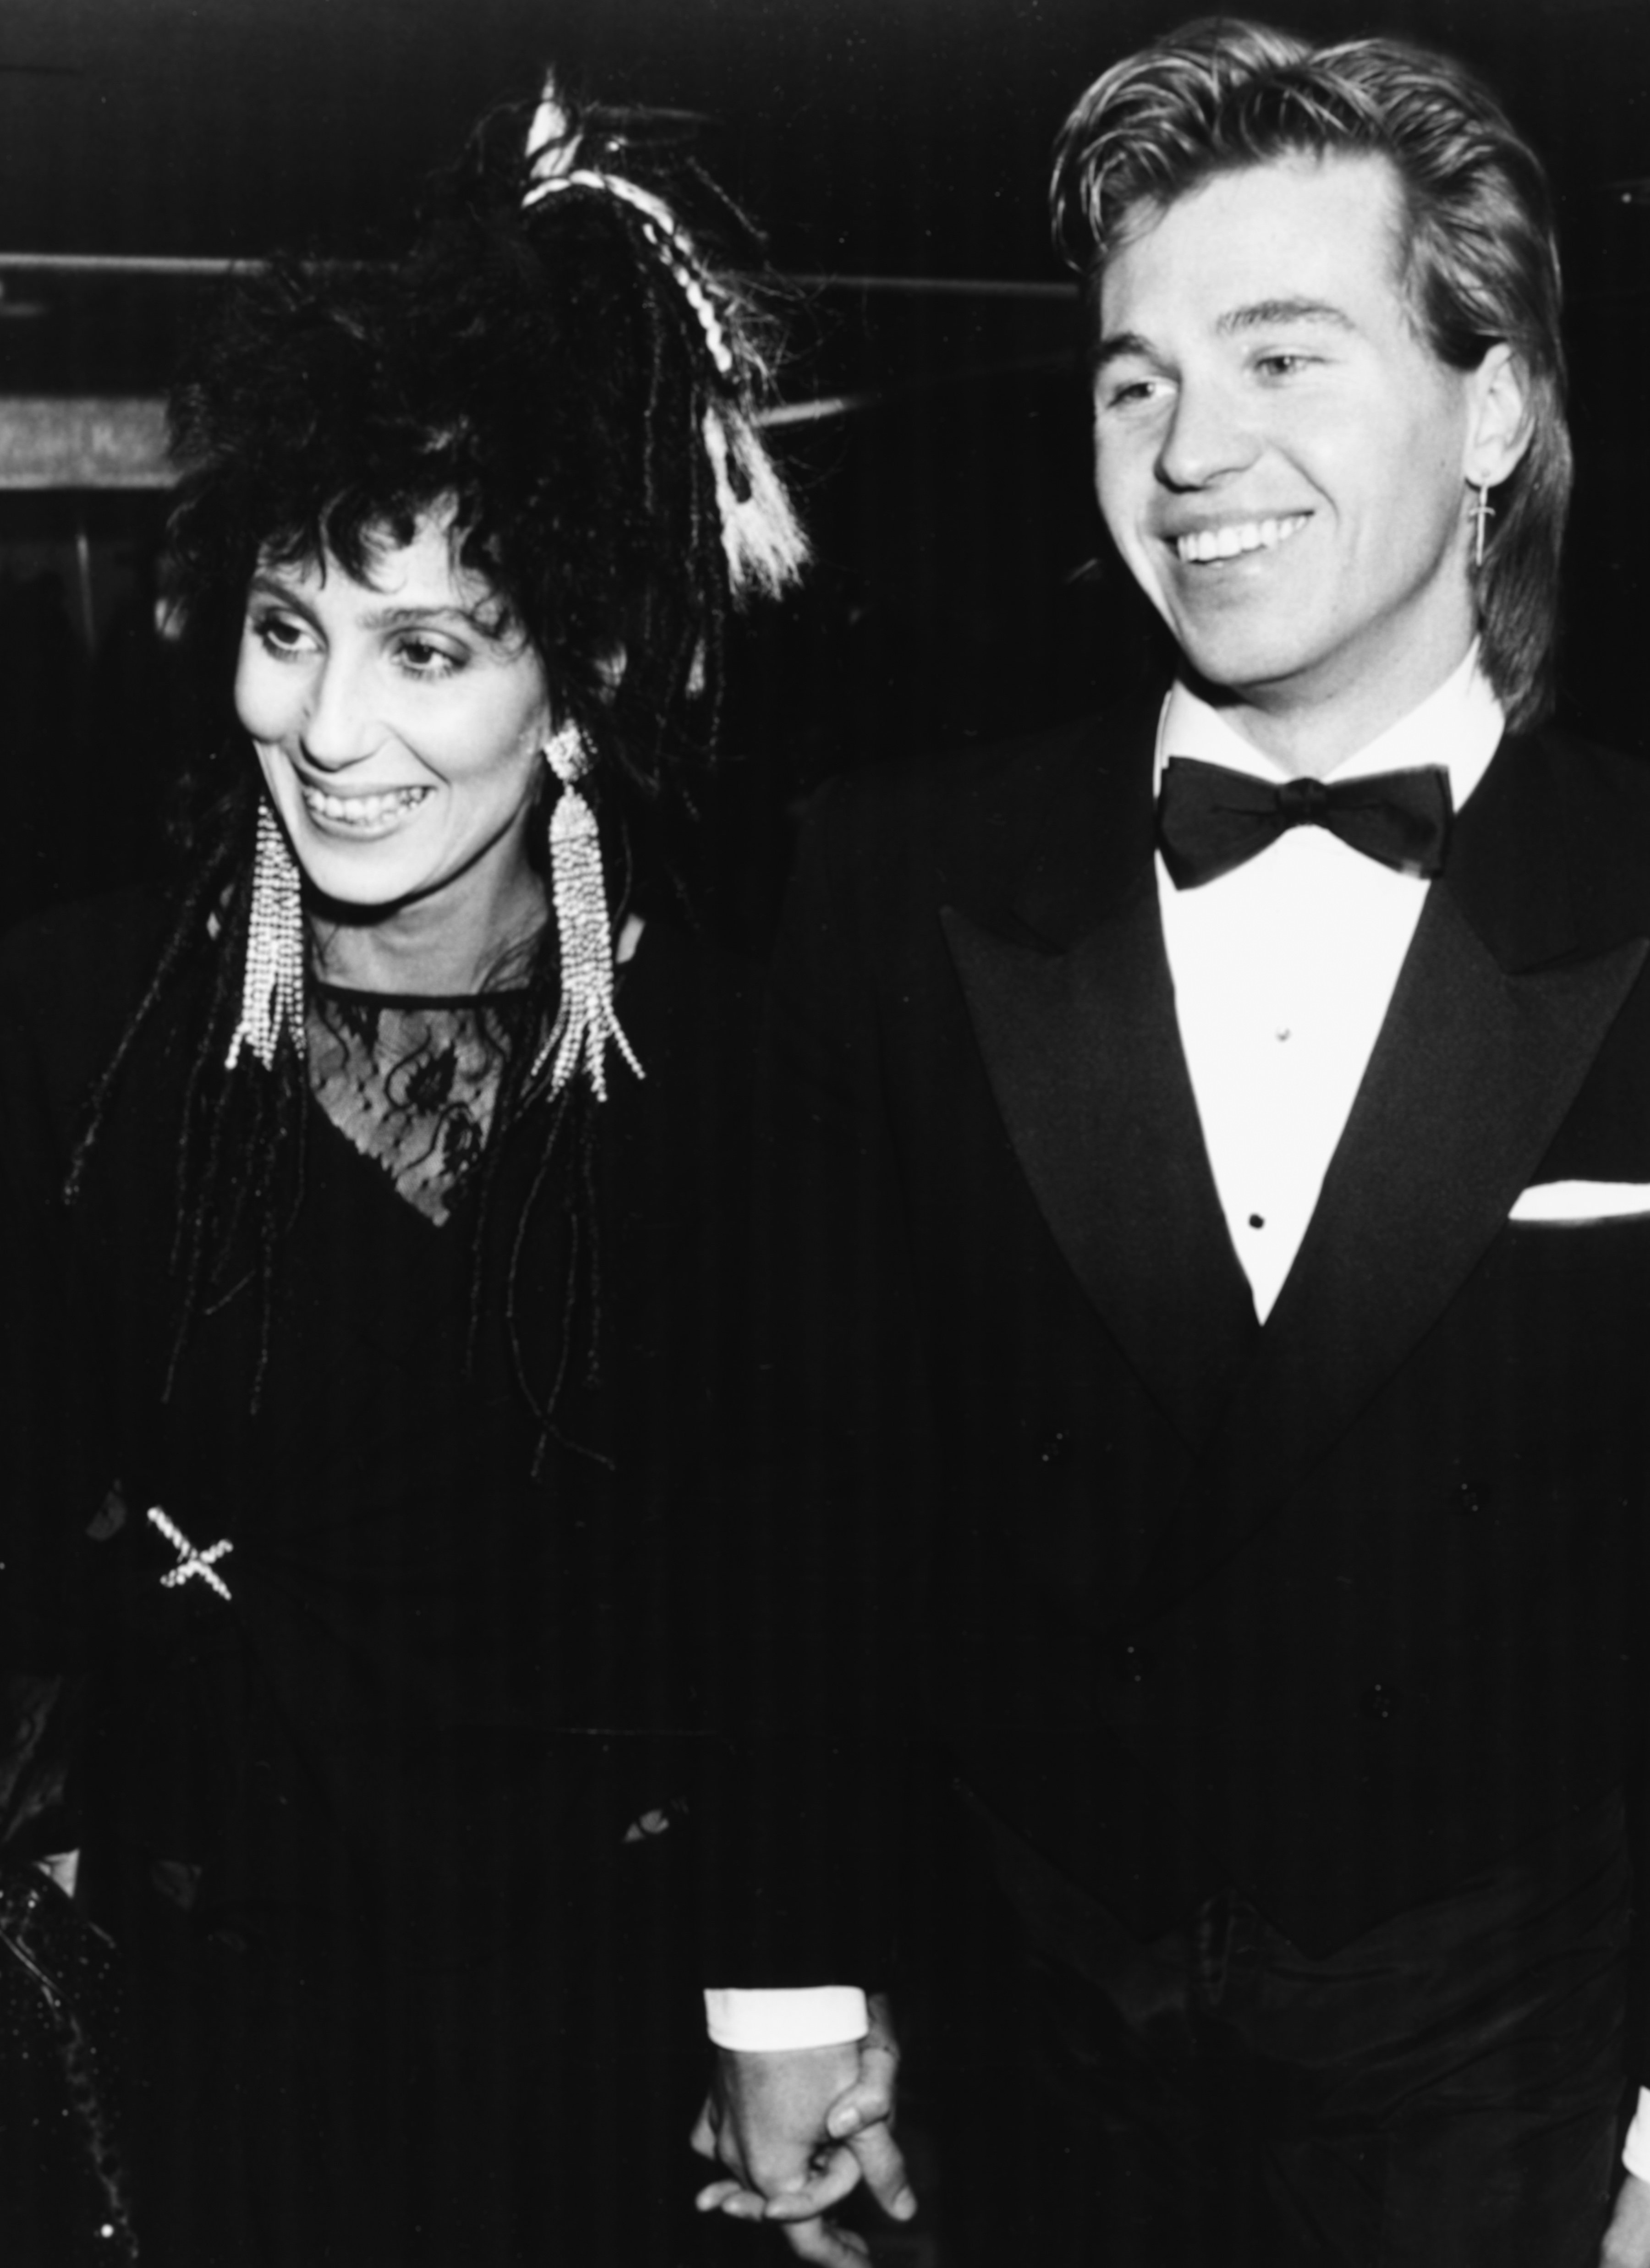  Cher and Val Kilmer at the 1984 BAFTA Awards in London, England | Photo: Getty Images